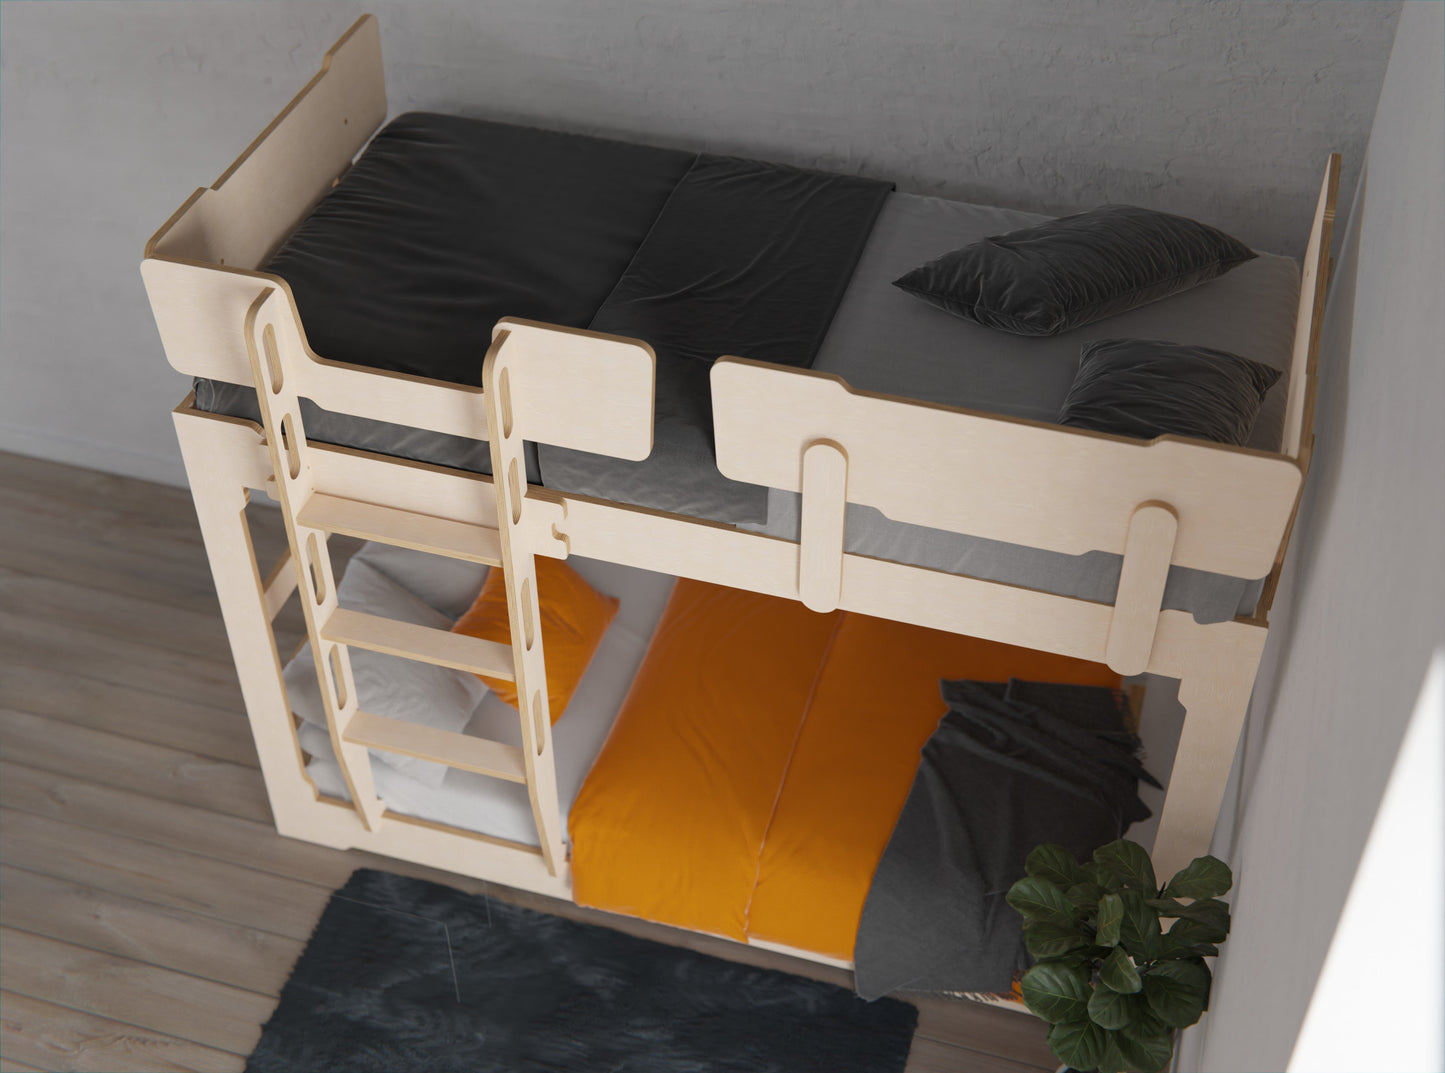 Maximise your space with the Transformer Bunk Bed. Adapts from low bed to bunk bed effortlessly.